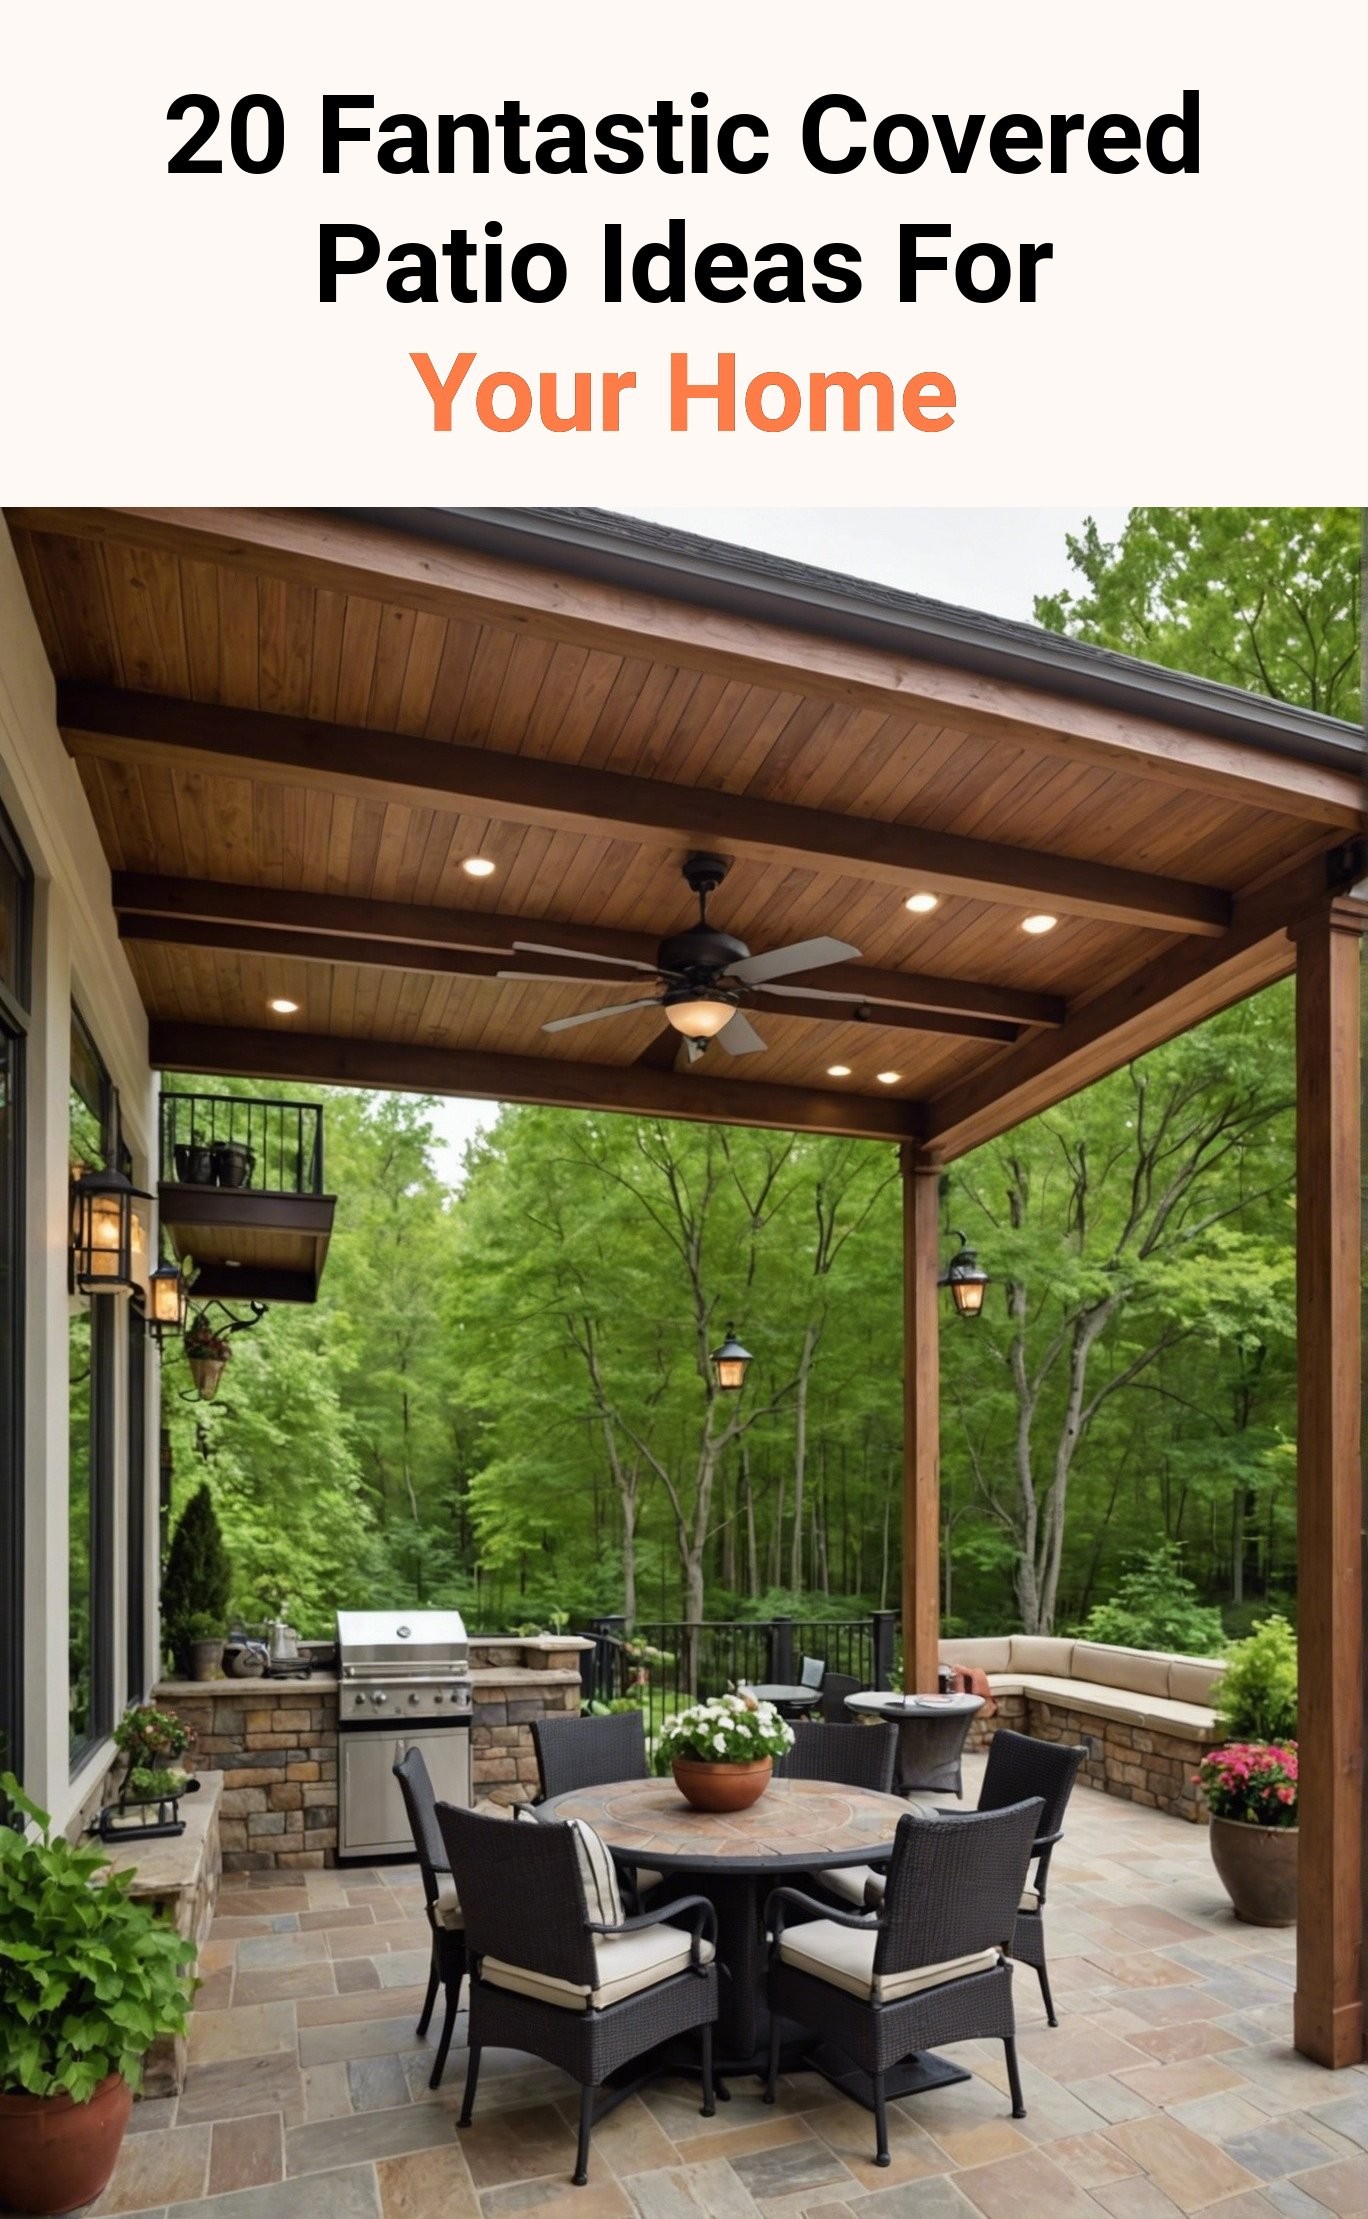 20 Fantastic Covered Patio Ideas For Your Home